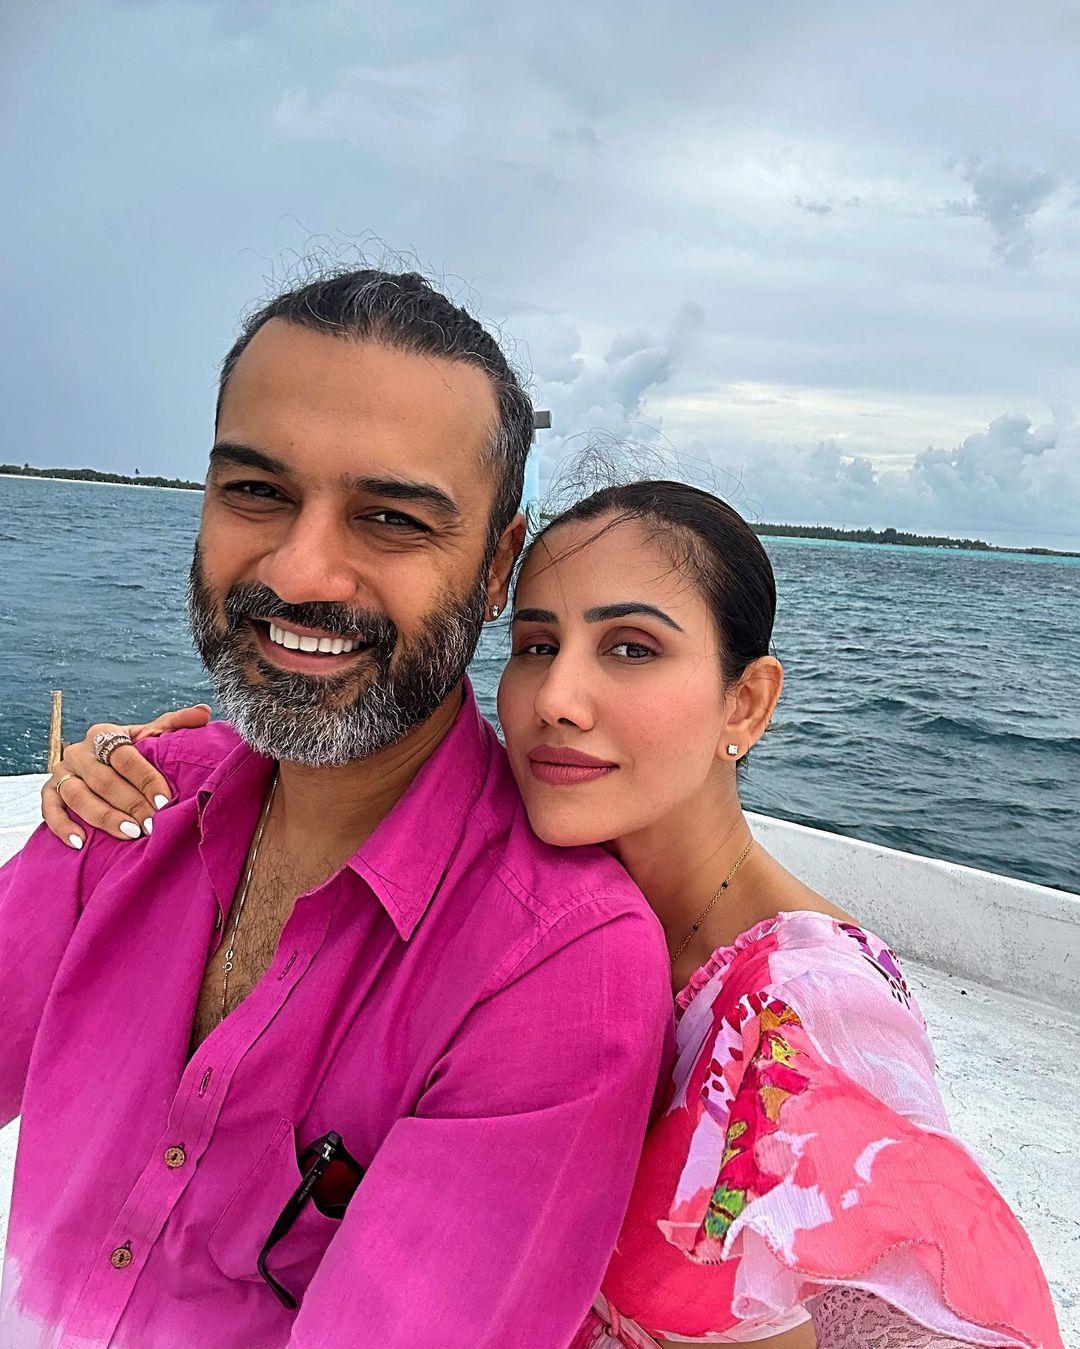 The couple had been dating for quite some time and exchanged vows at a Gurdwara in Santa Cruz West in Mumbai on June 7. On her wedding day, Sonnalli wore a pastel pink saree, and she is continuing the chromatic theme on her honeymoon!